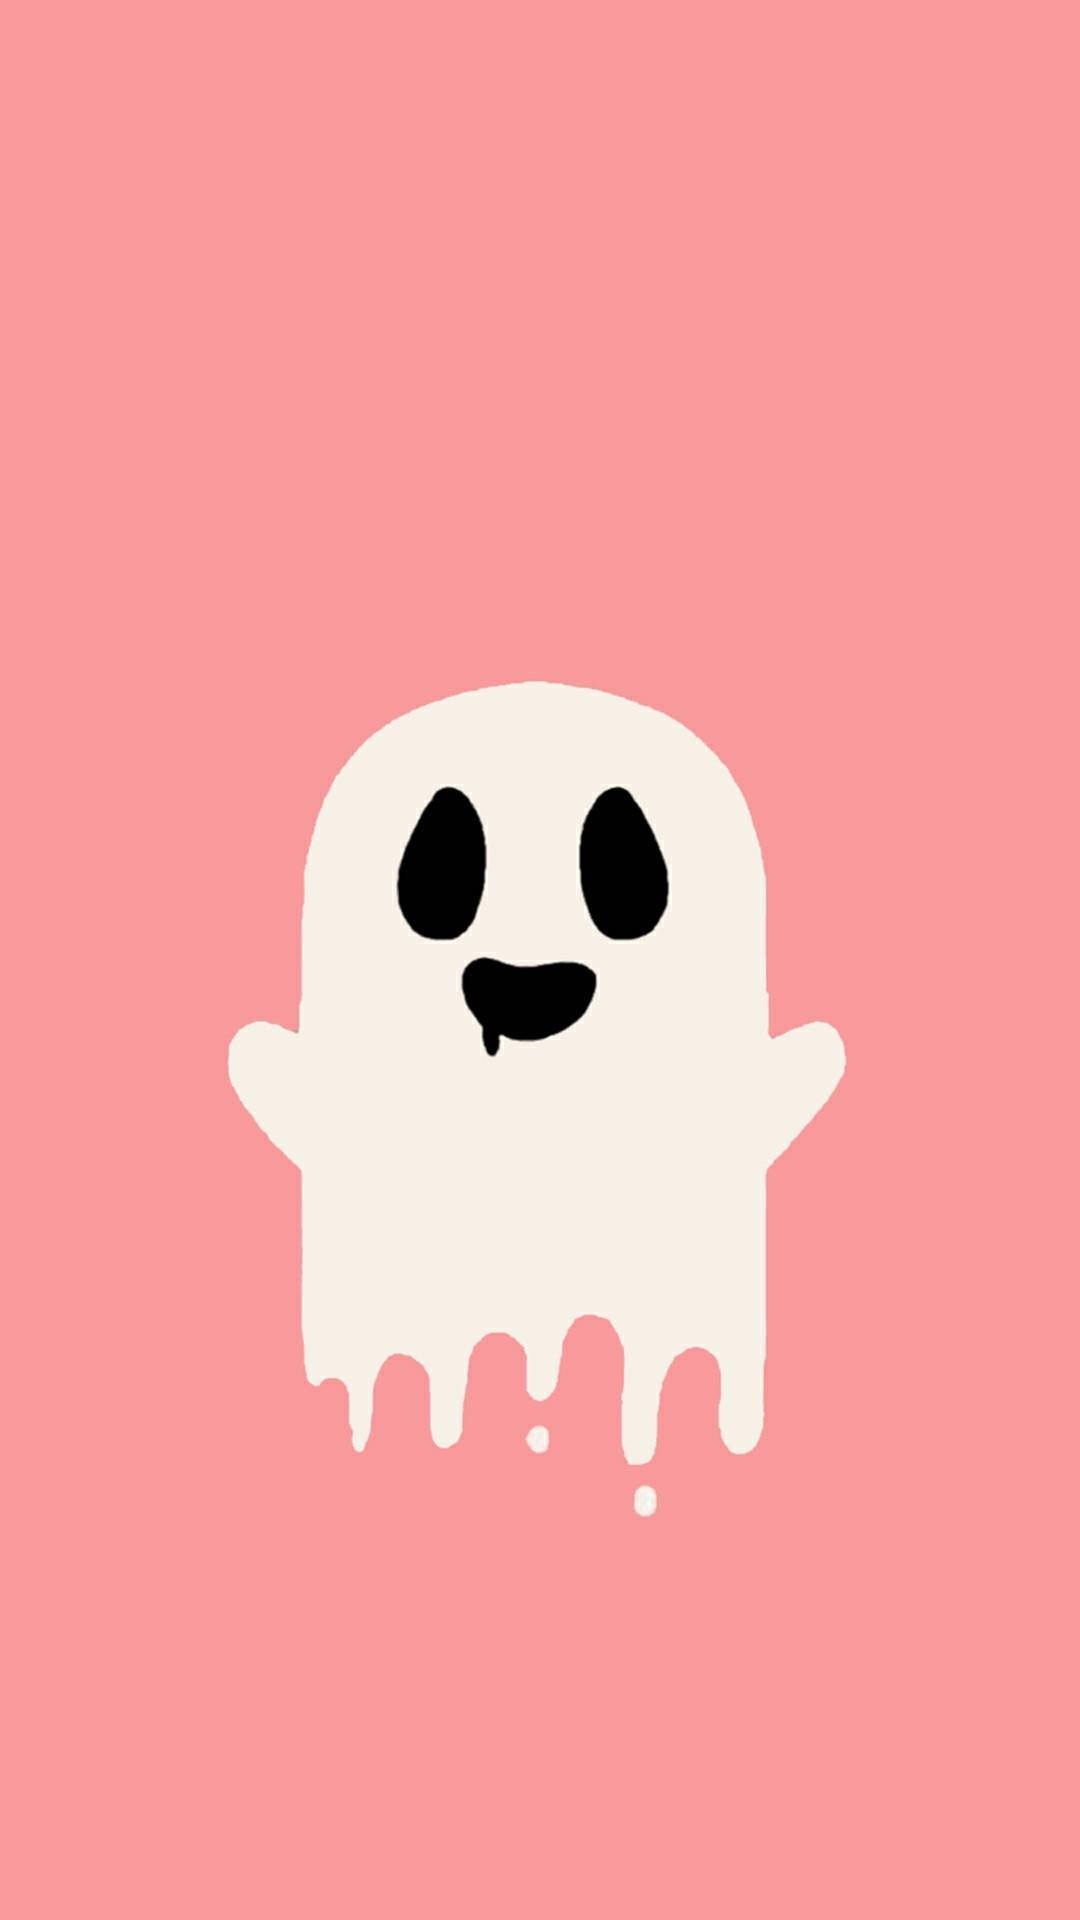 Free Halloween Wallpapers for Your Phone  Carrie Elle